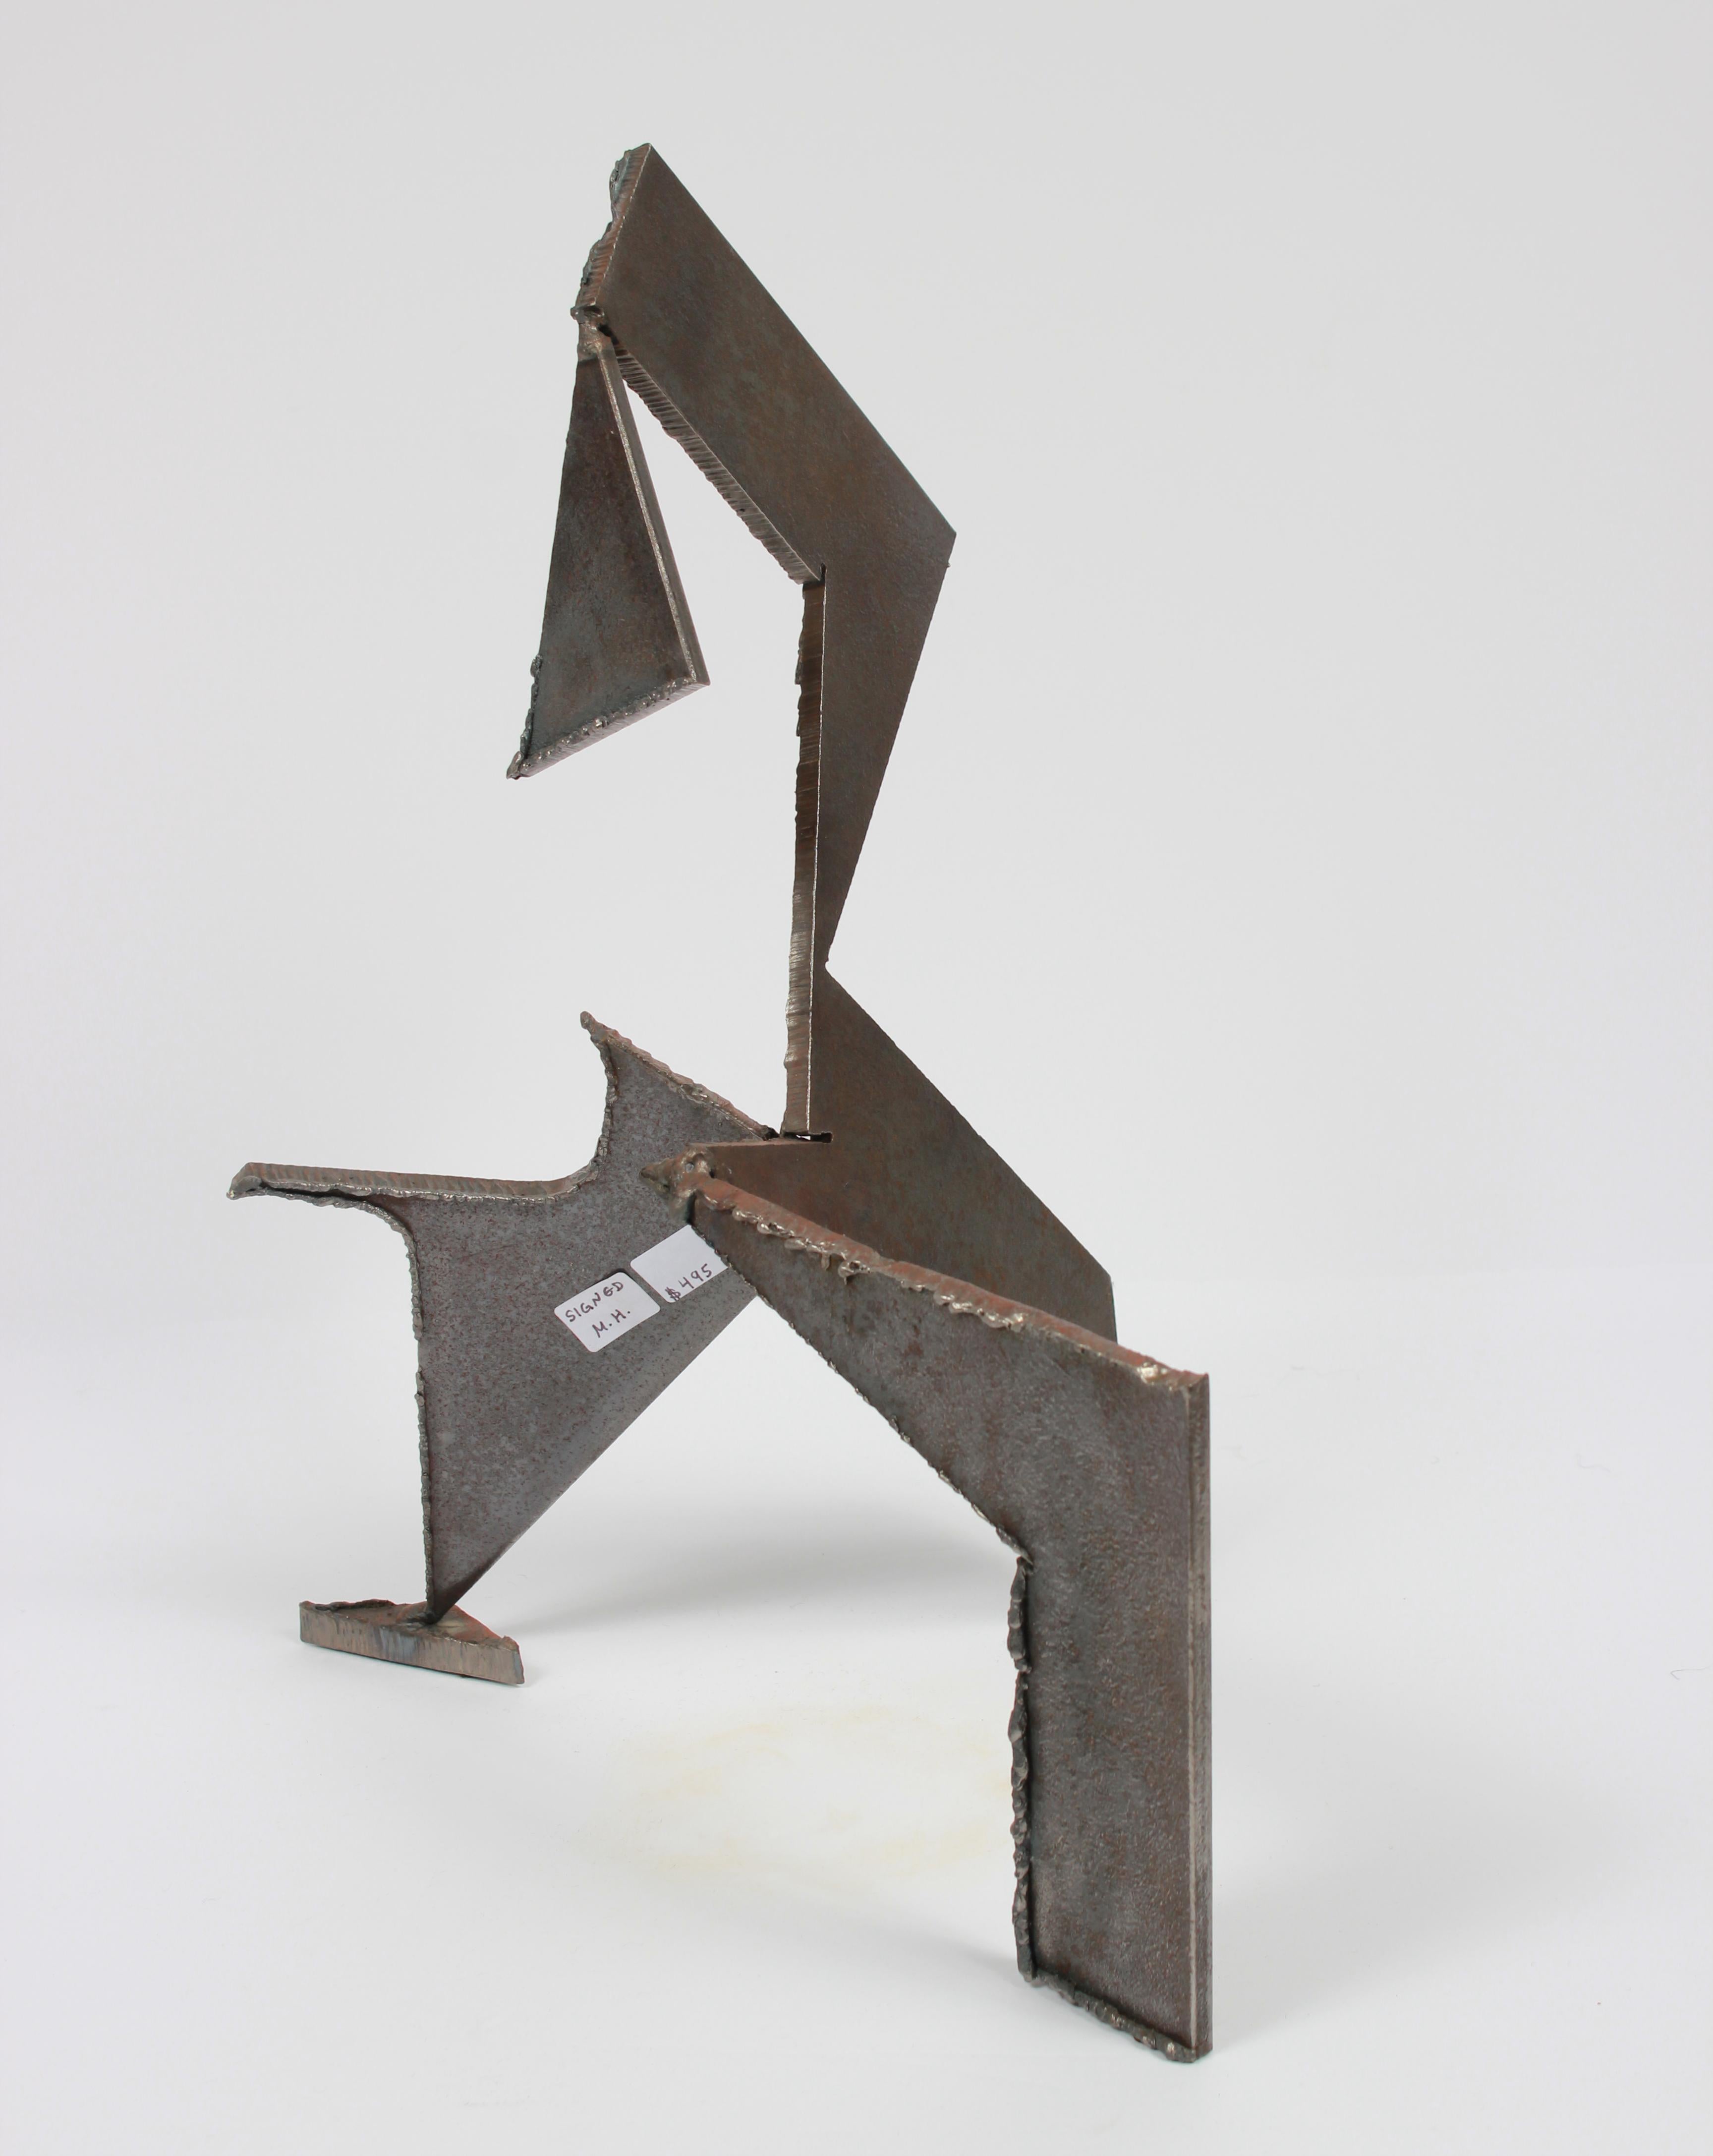 Abstracted Geometric Welded Steel Sculpture, Late 20th Century - Gray Abstract Sculpture by Unknown